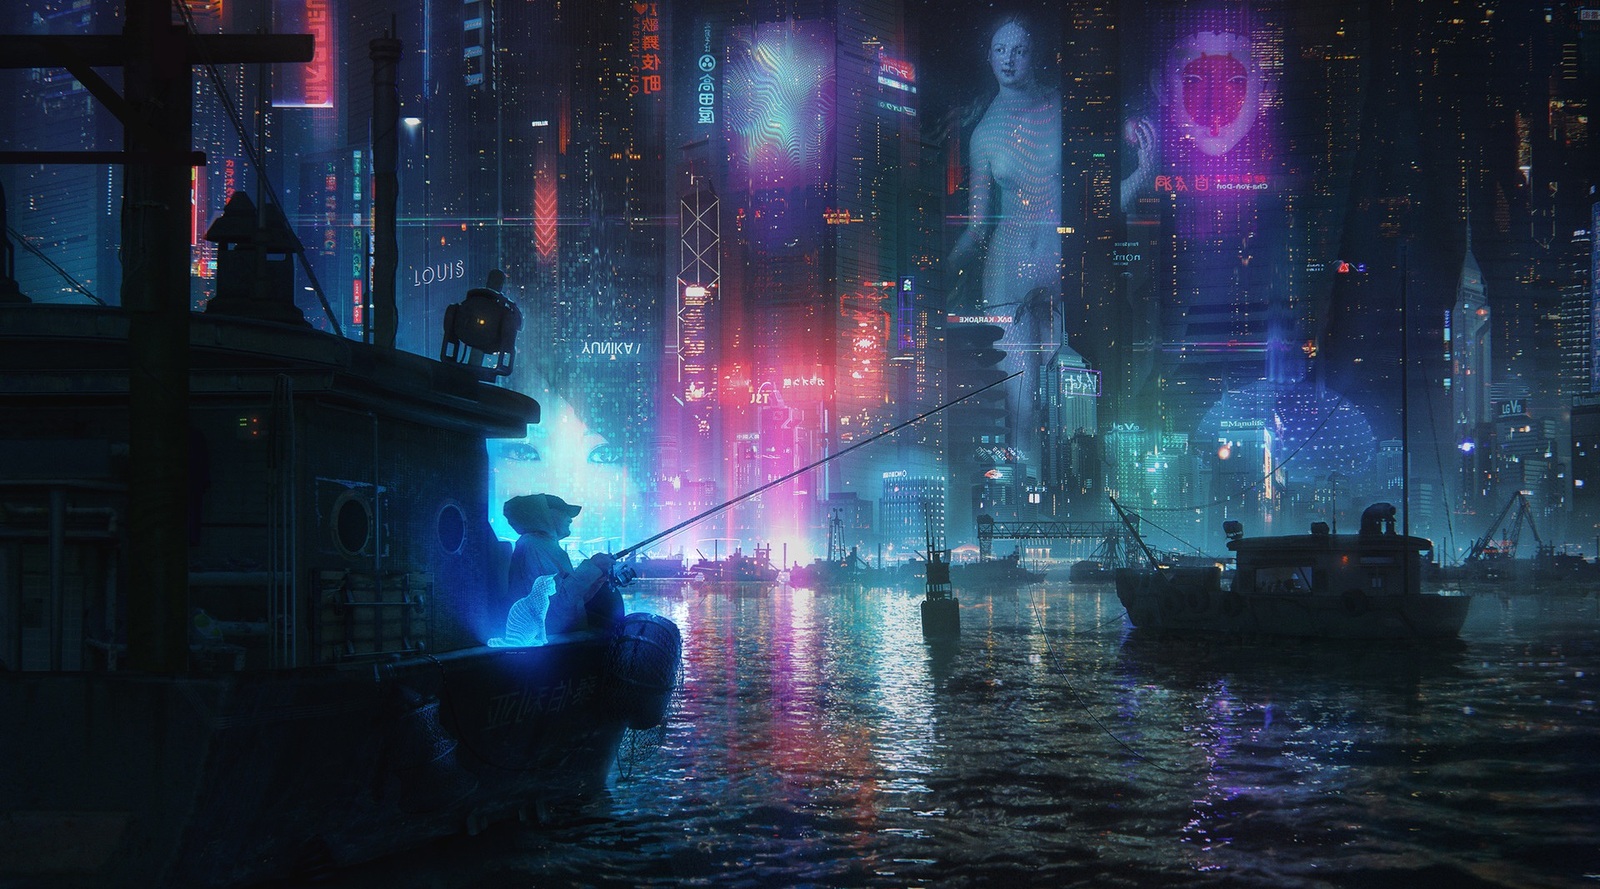 Ghost in the shell - Art, Ghost in armor, 